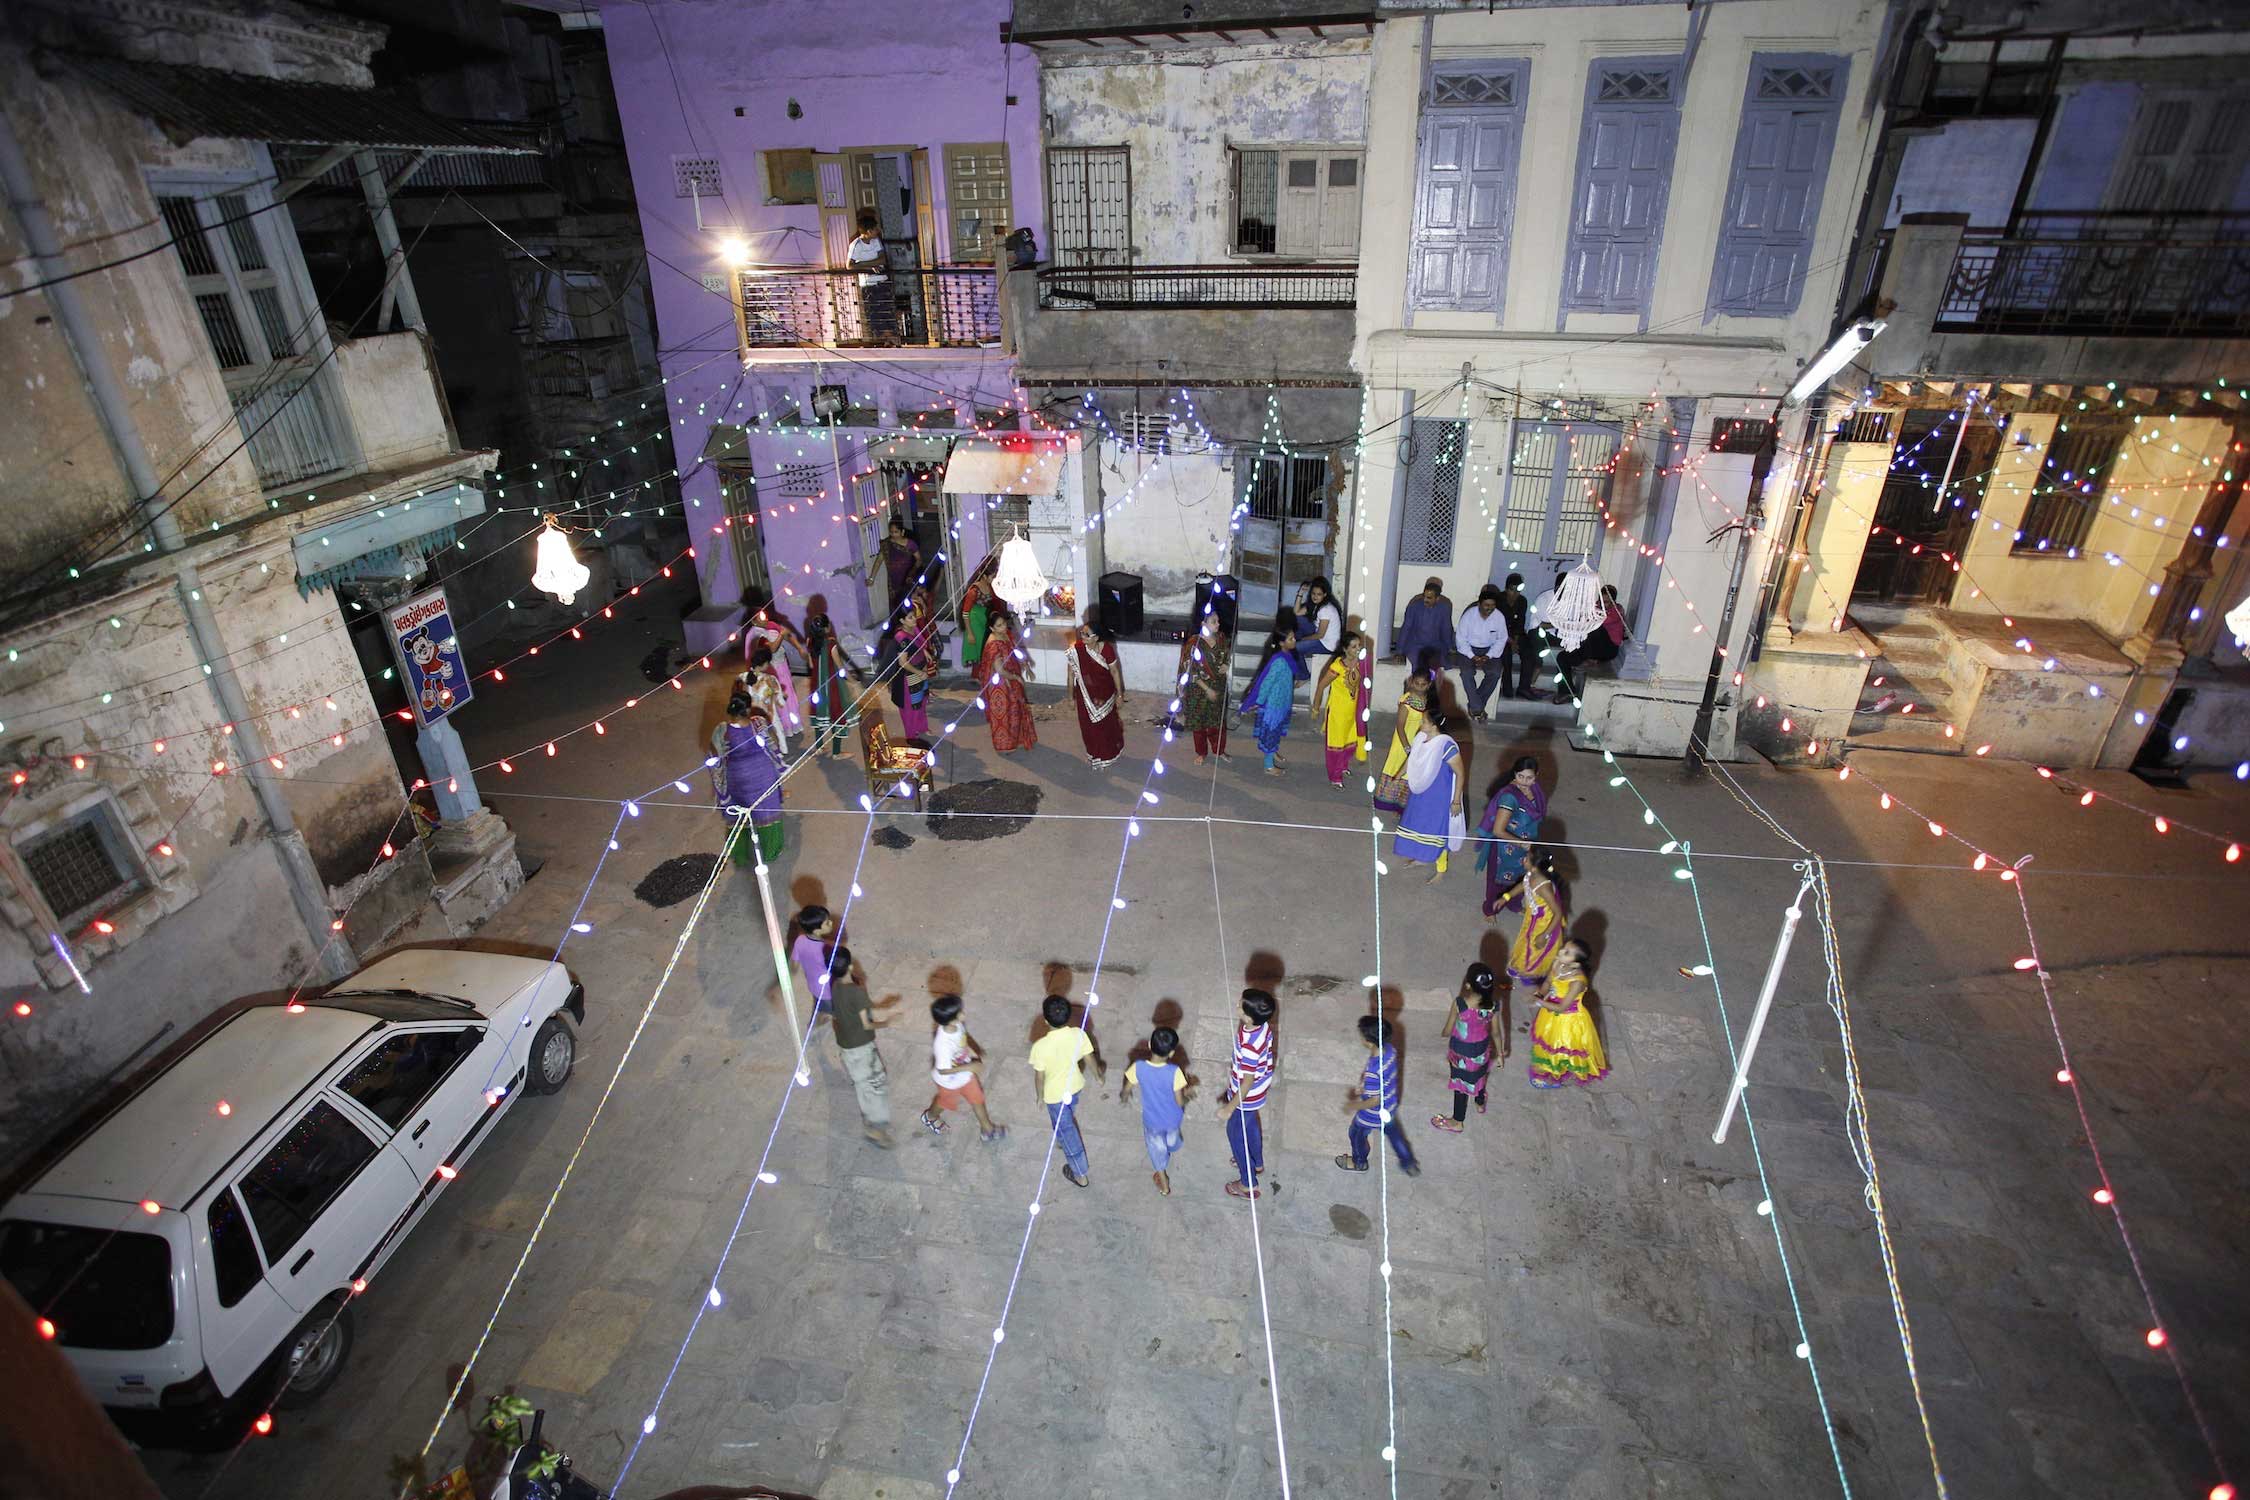 A “pol” community dances in their courtyard, the place decorated for the festivity with many LED lights and chandeliers. Many Gujaratis emigrated to the US, especially to the New York City and New Jersey area. Many of them return to their home state for the holidays and join their families. People are dancing all night, and often the celebration ends at dawn, with a breakfast, eating the blessed food.